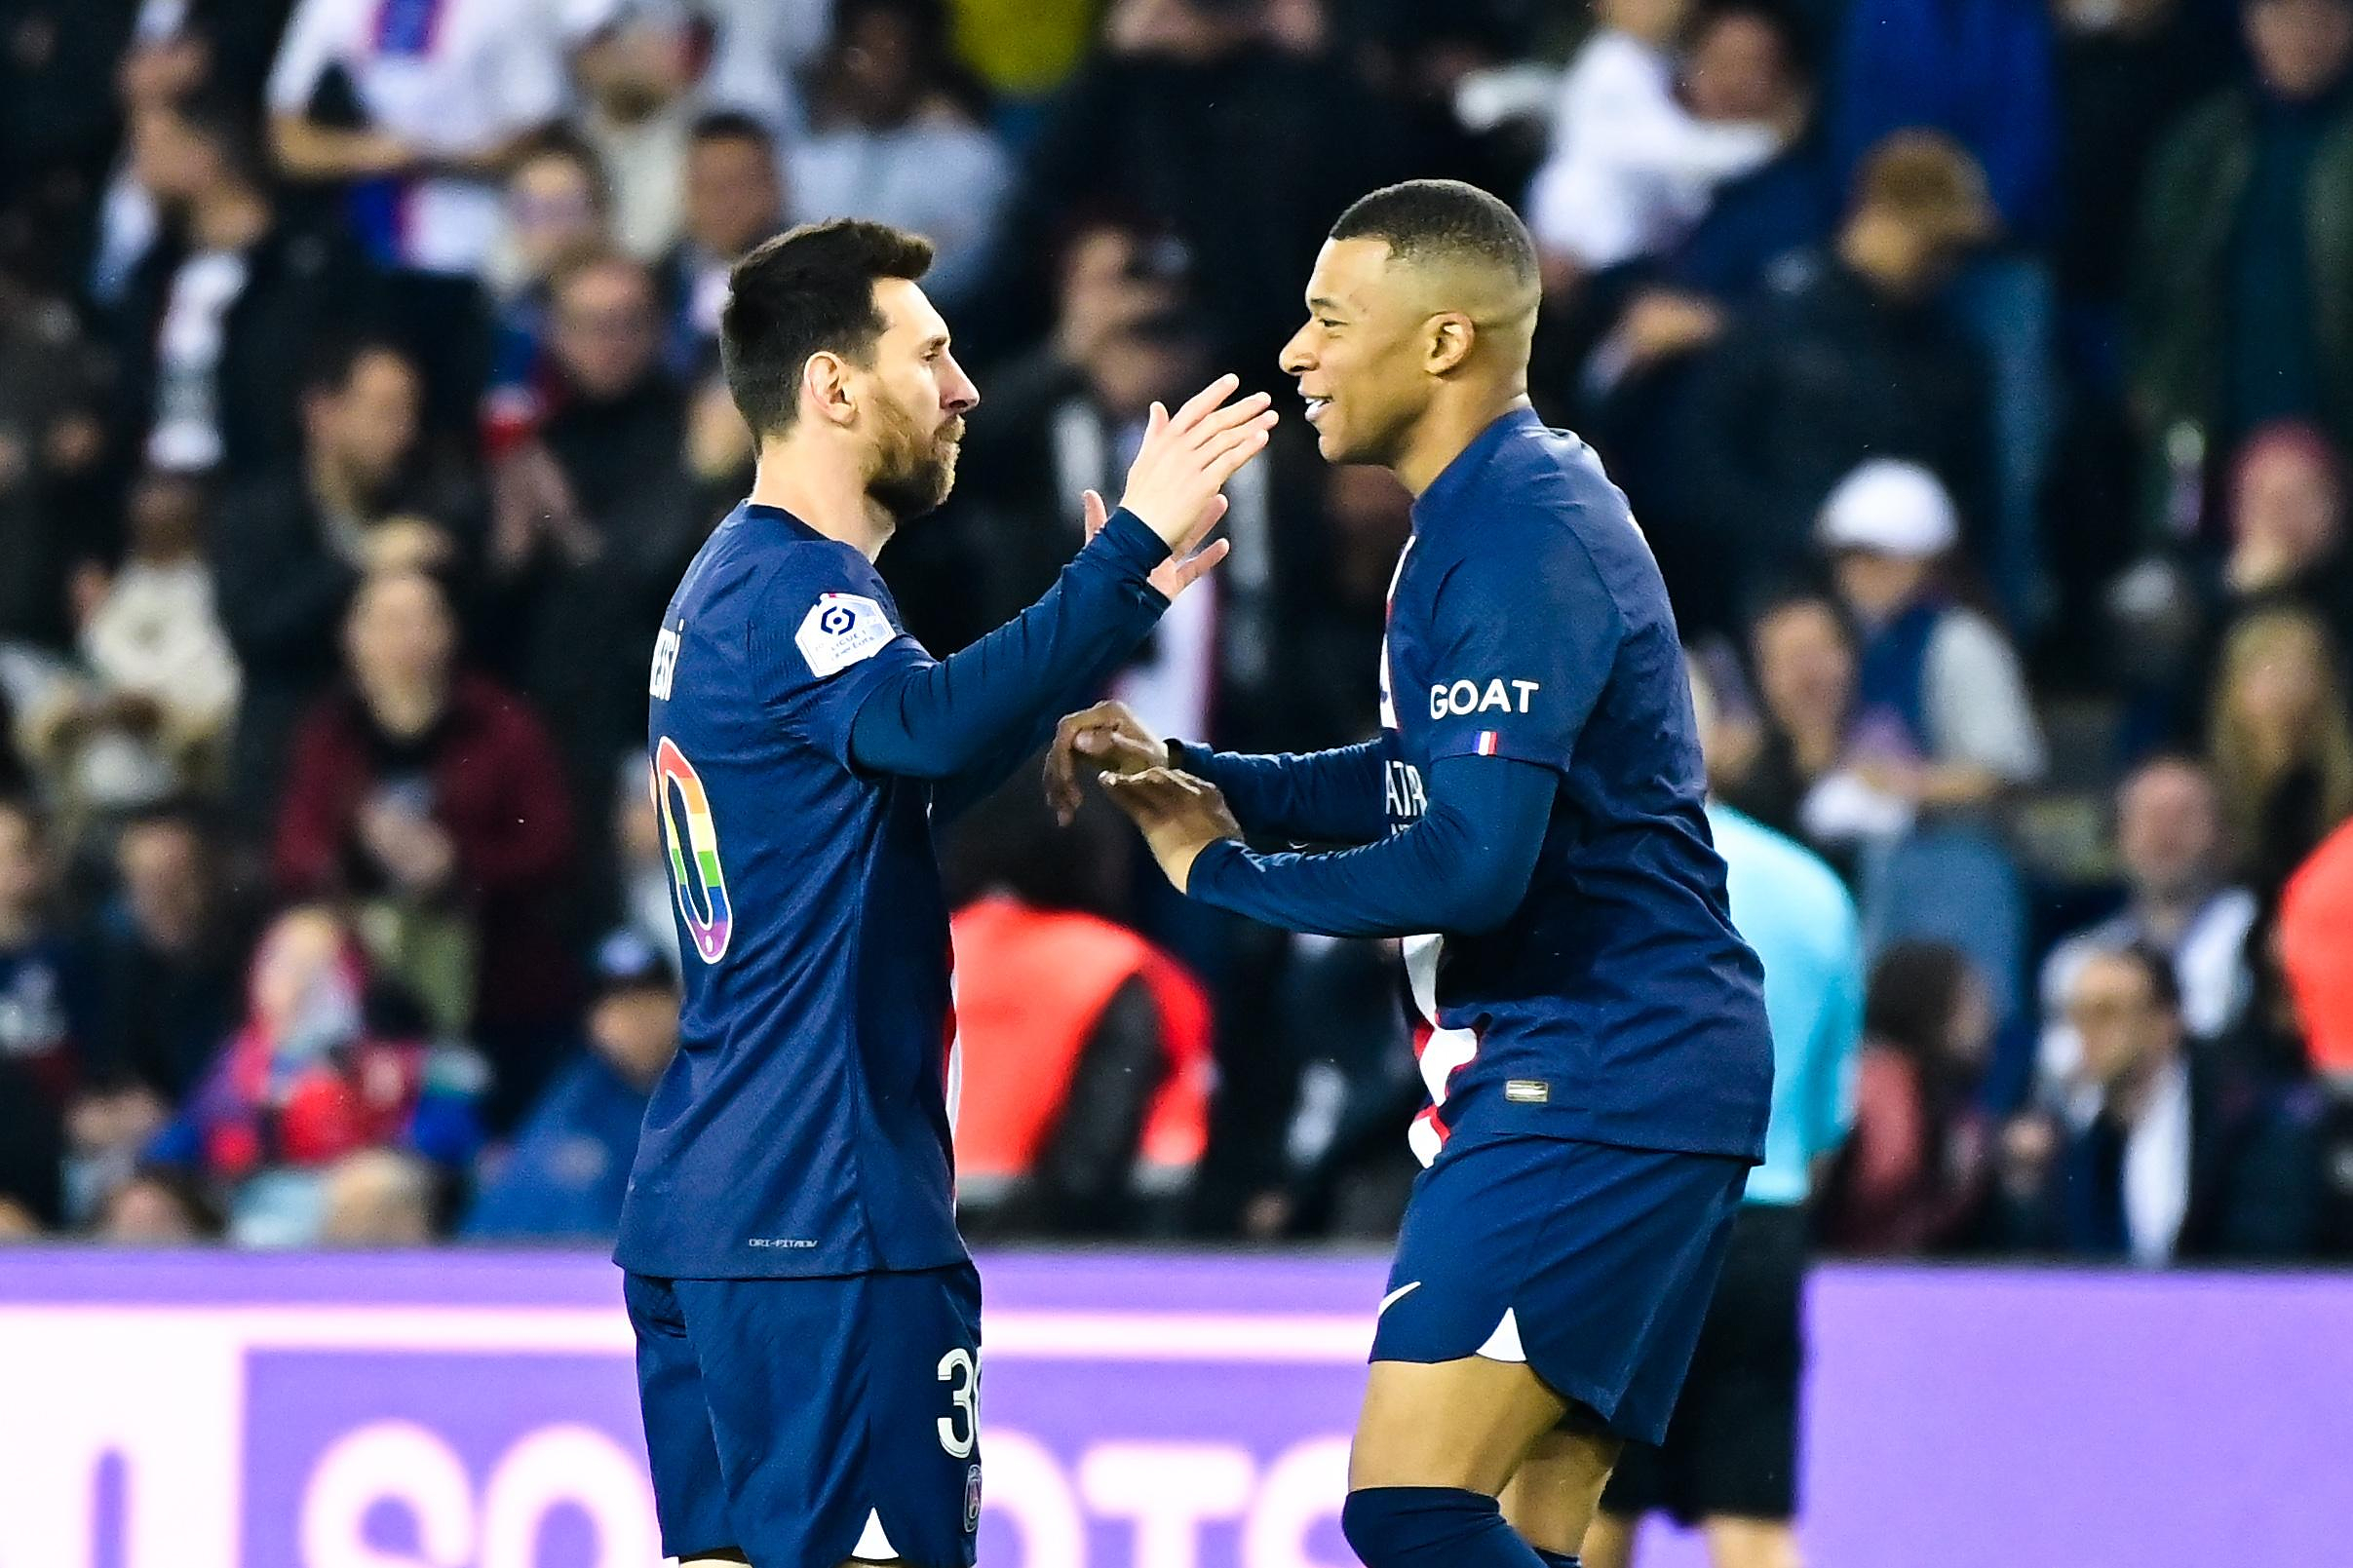 “You still miss not playing with Leo Messi!” : Kylian Mbappé talks about his relationship with the Argentinian